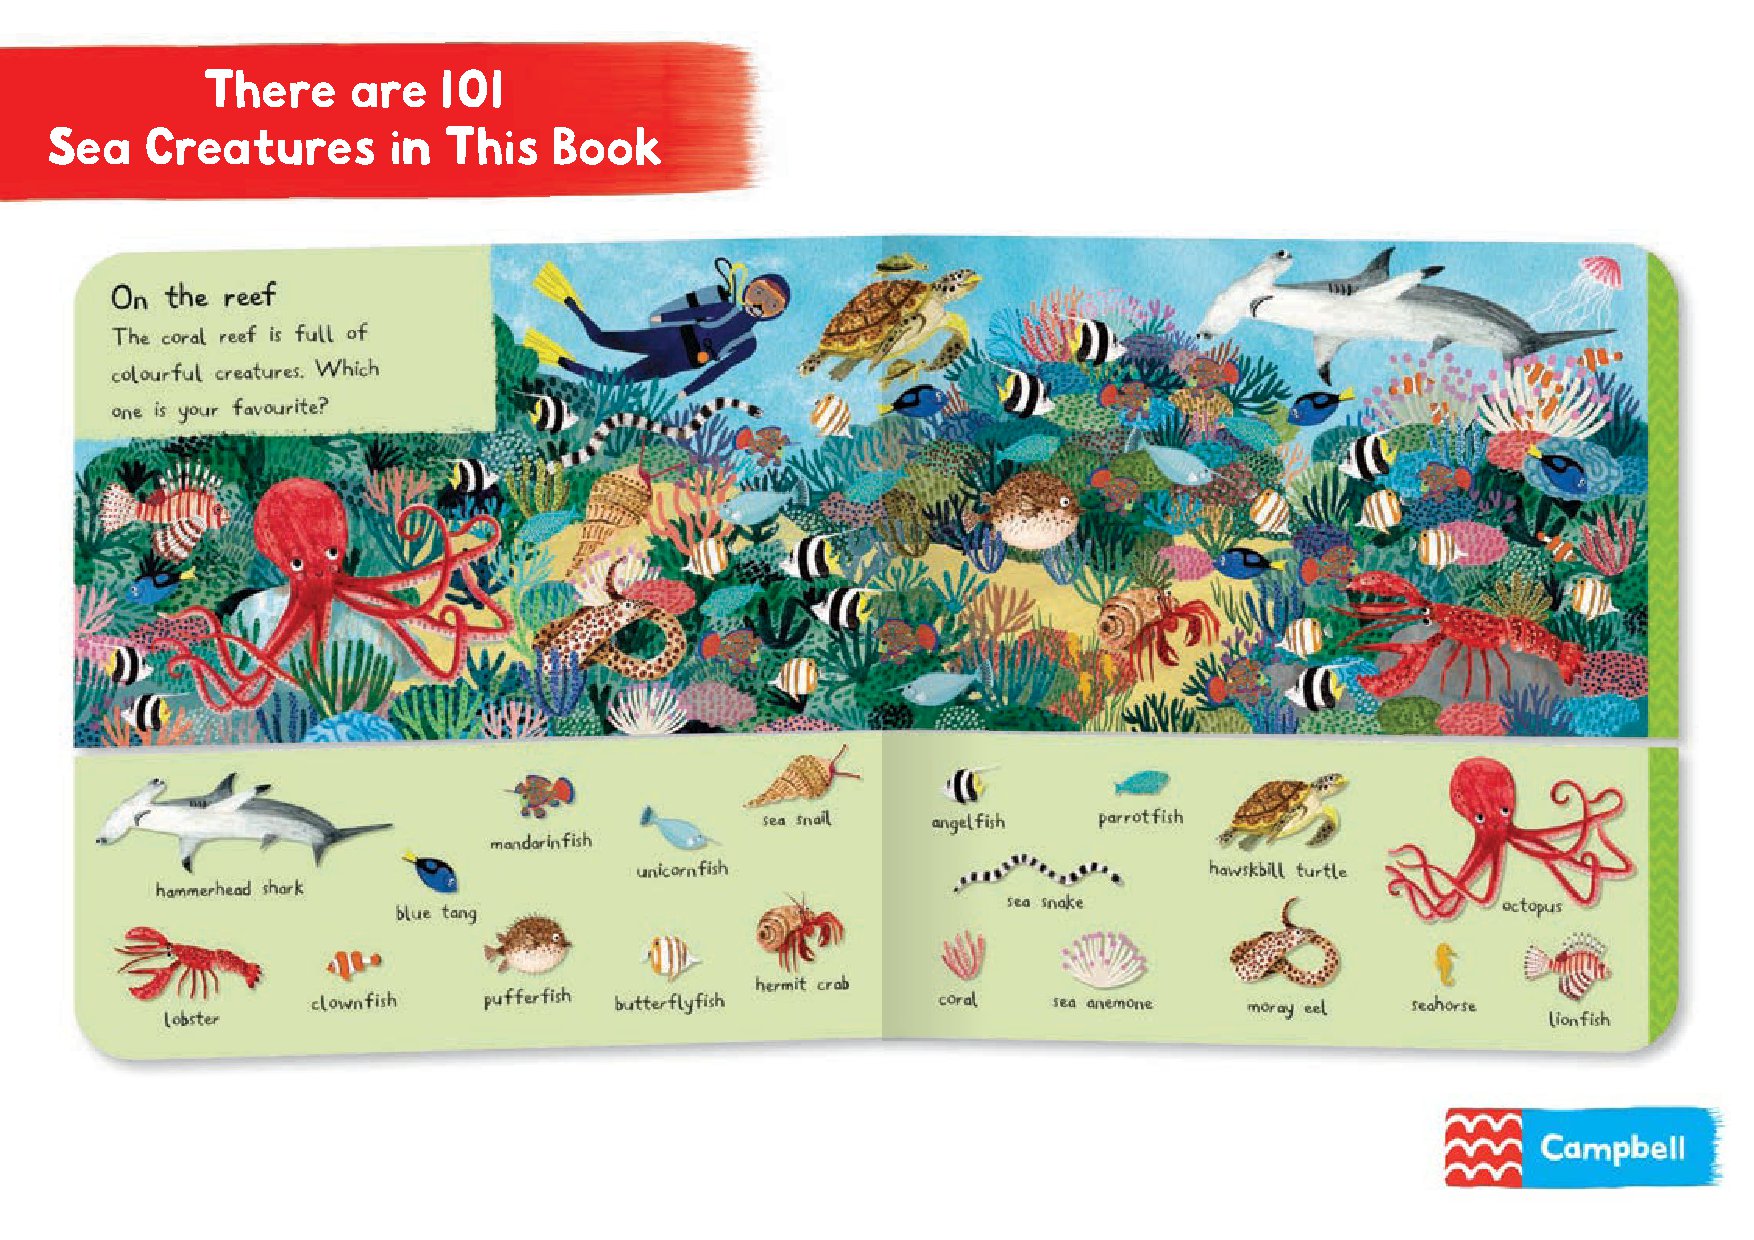 There Are 101 Sea Creatures in This Book